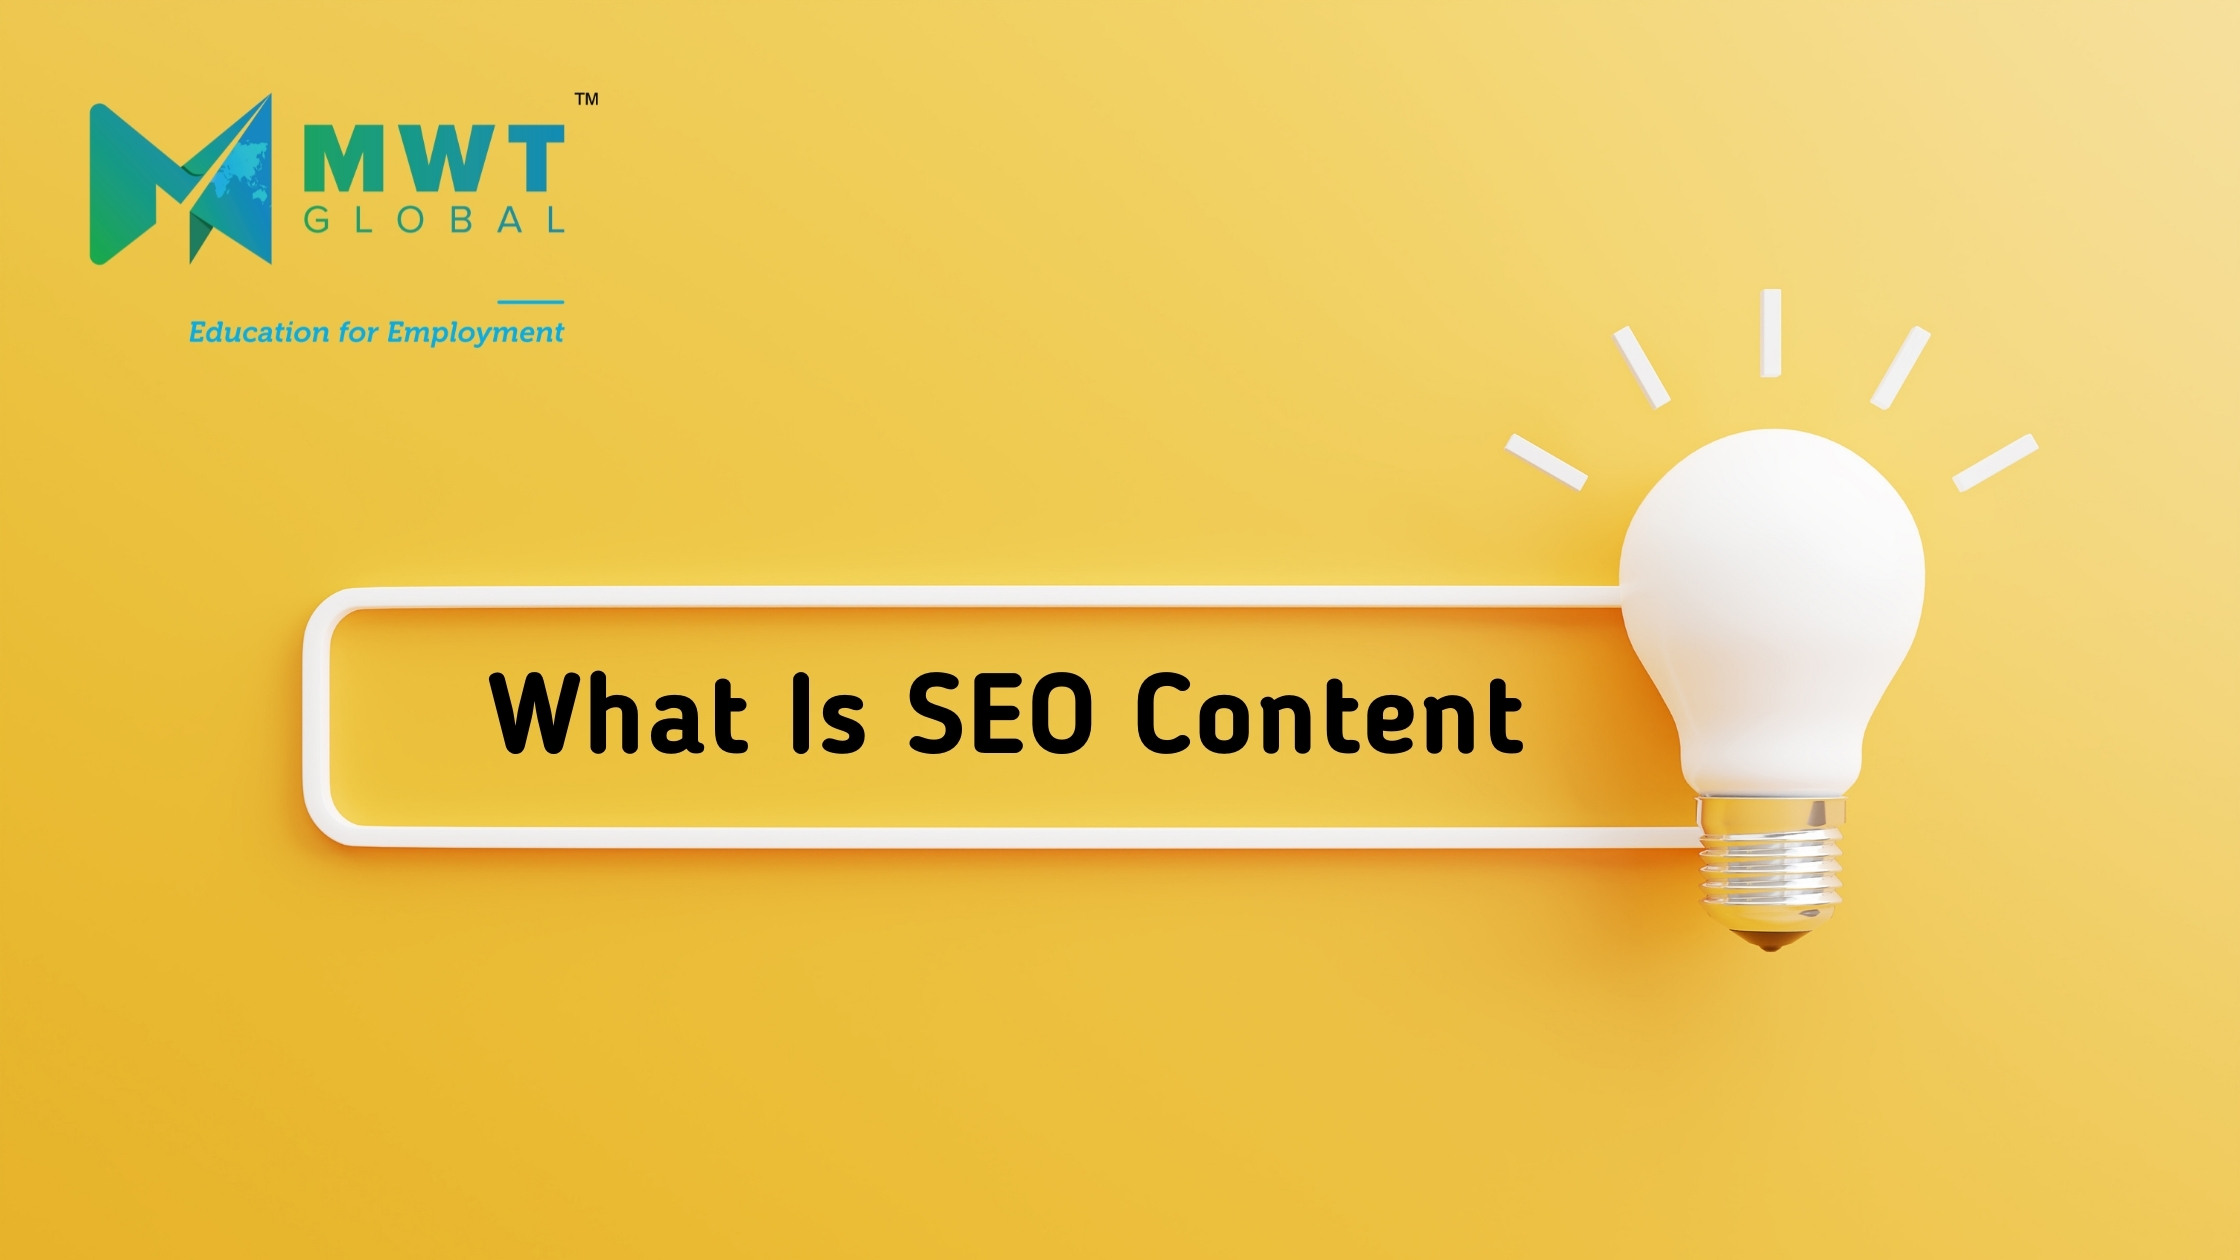 What Is SEO Content? A Guide for Producing SEO-Friendly Content